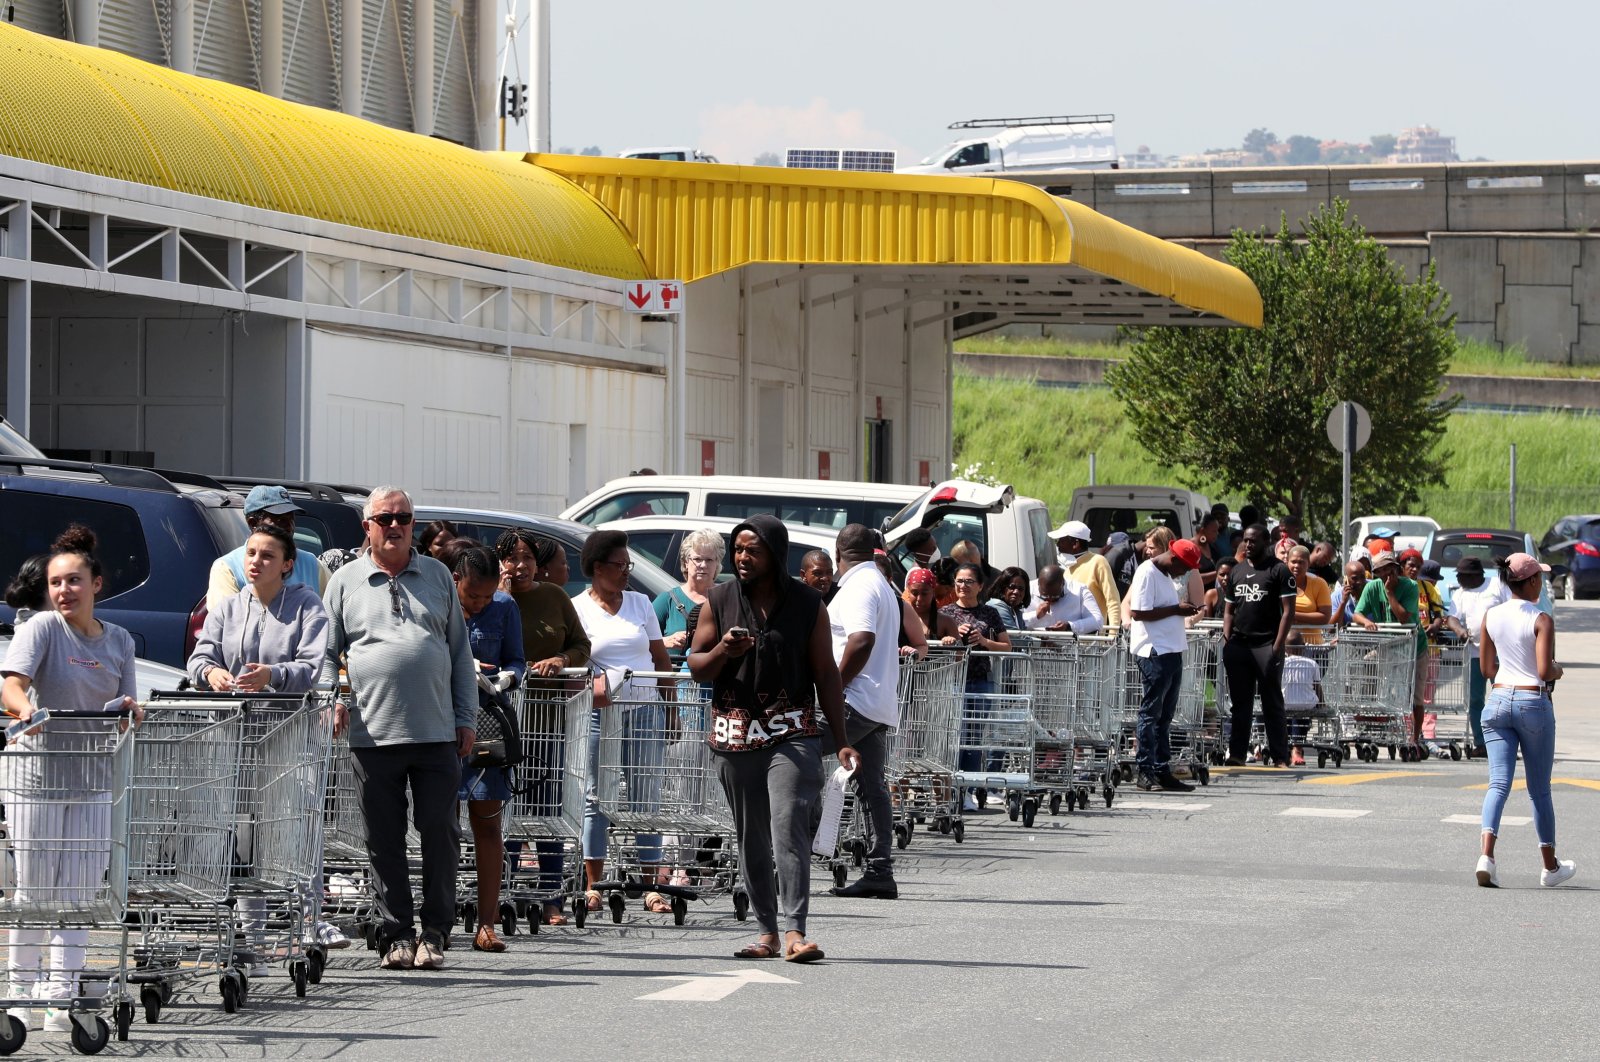 Shoppers queue to stock up on groceries at a Makro Store at Strubens Valley, ahead of a nationwide lockdown for 21 to try to contain the COVID-19 outbreak, in Johannesburg, South Africa, March 24, 2020. (Reuters Photo)